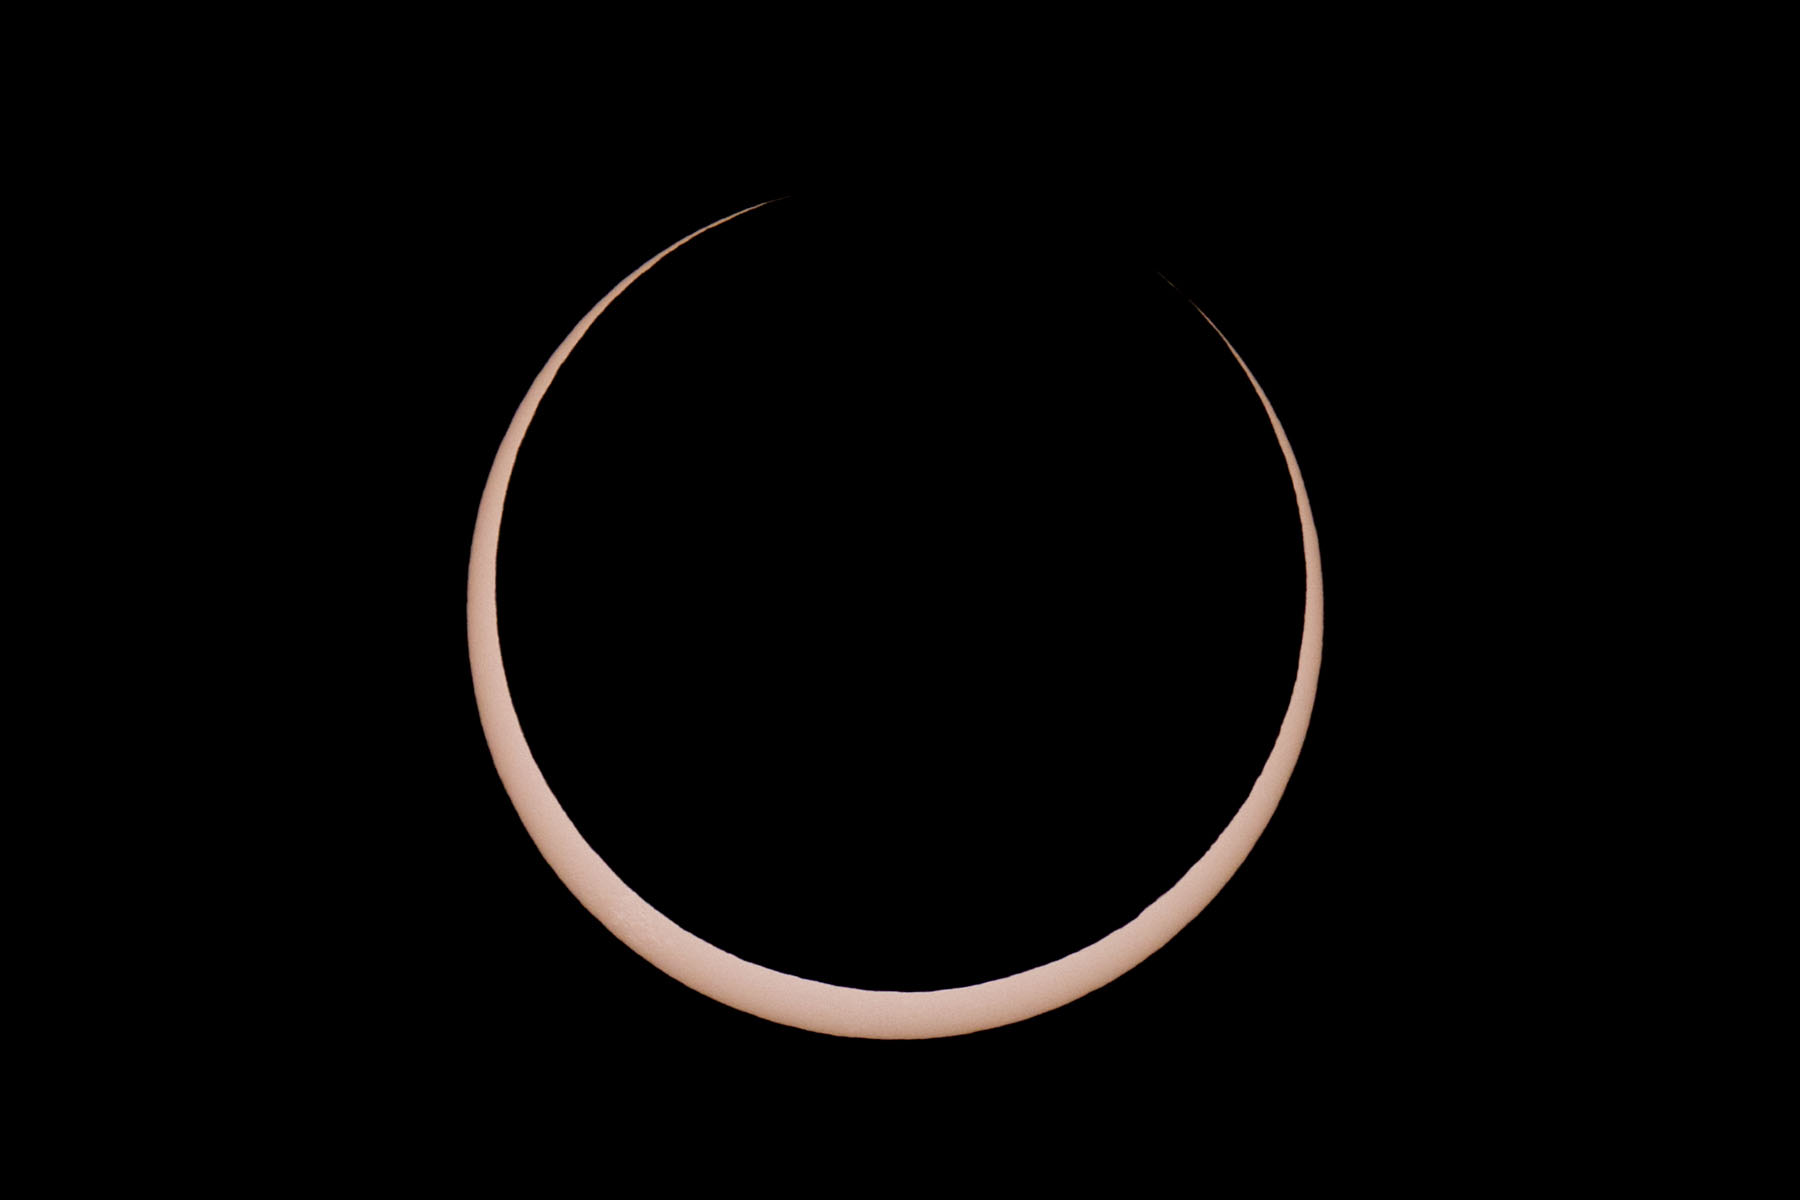 Annular solar eclipse, two minutes before peak.  Glass solar filter on Televue 85 telescope, Canon 6D Mark II camera on T-mount, 600mm F7 equivalent.  Click for next photo.